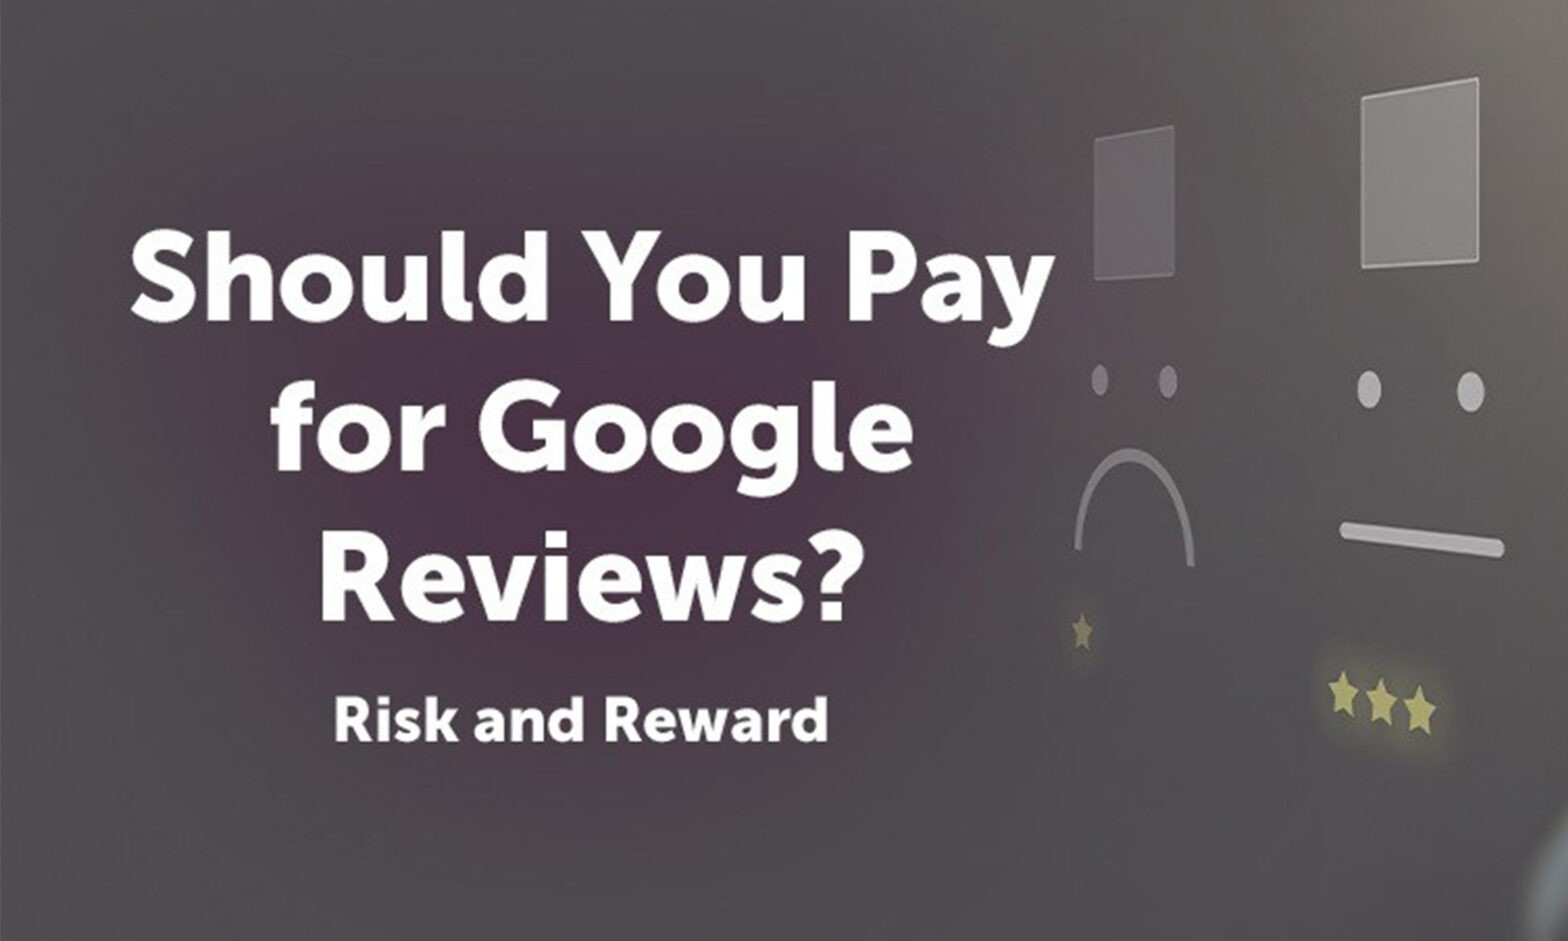 Featured image for post: Should You Pay for Google Reviews? Risk vs Reward